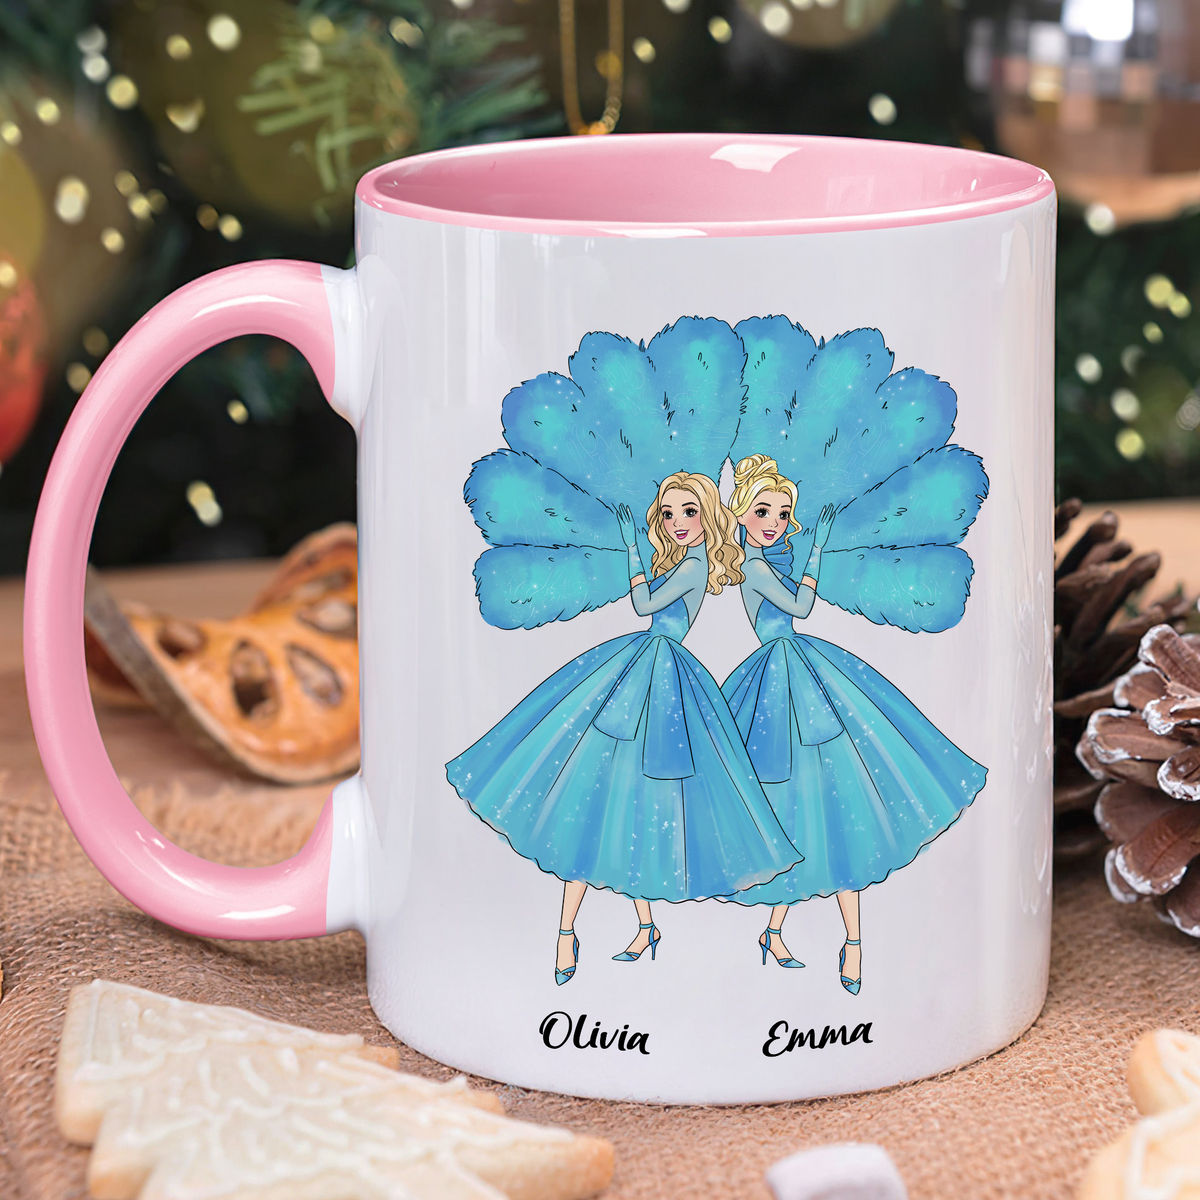 Personalized Mug - Personalized Mug For Sisters - Sisters Sisters - White Christmas - Up To 5 Woman, gift for her, gift for sisters (58095)_6